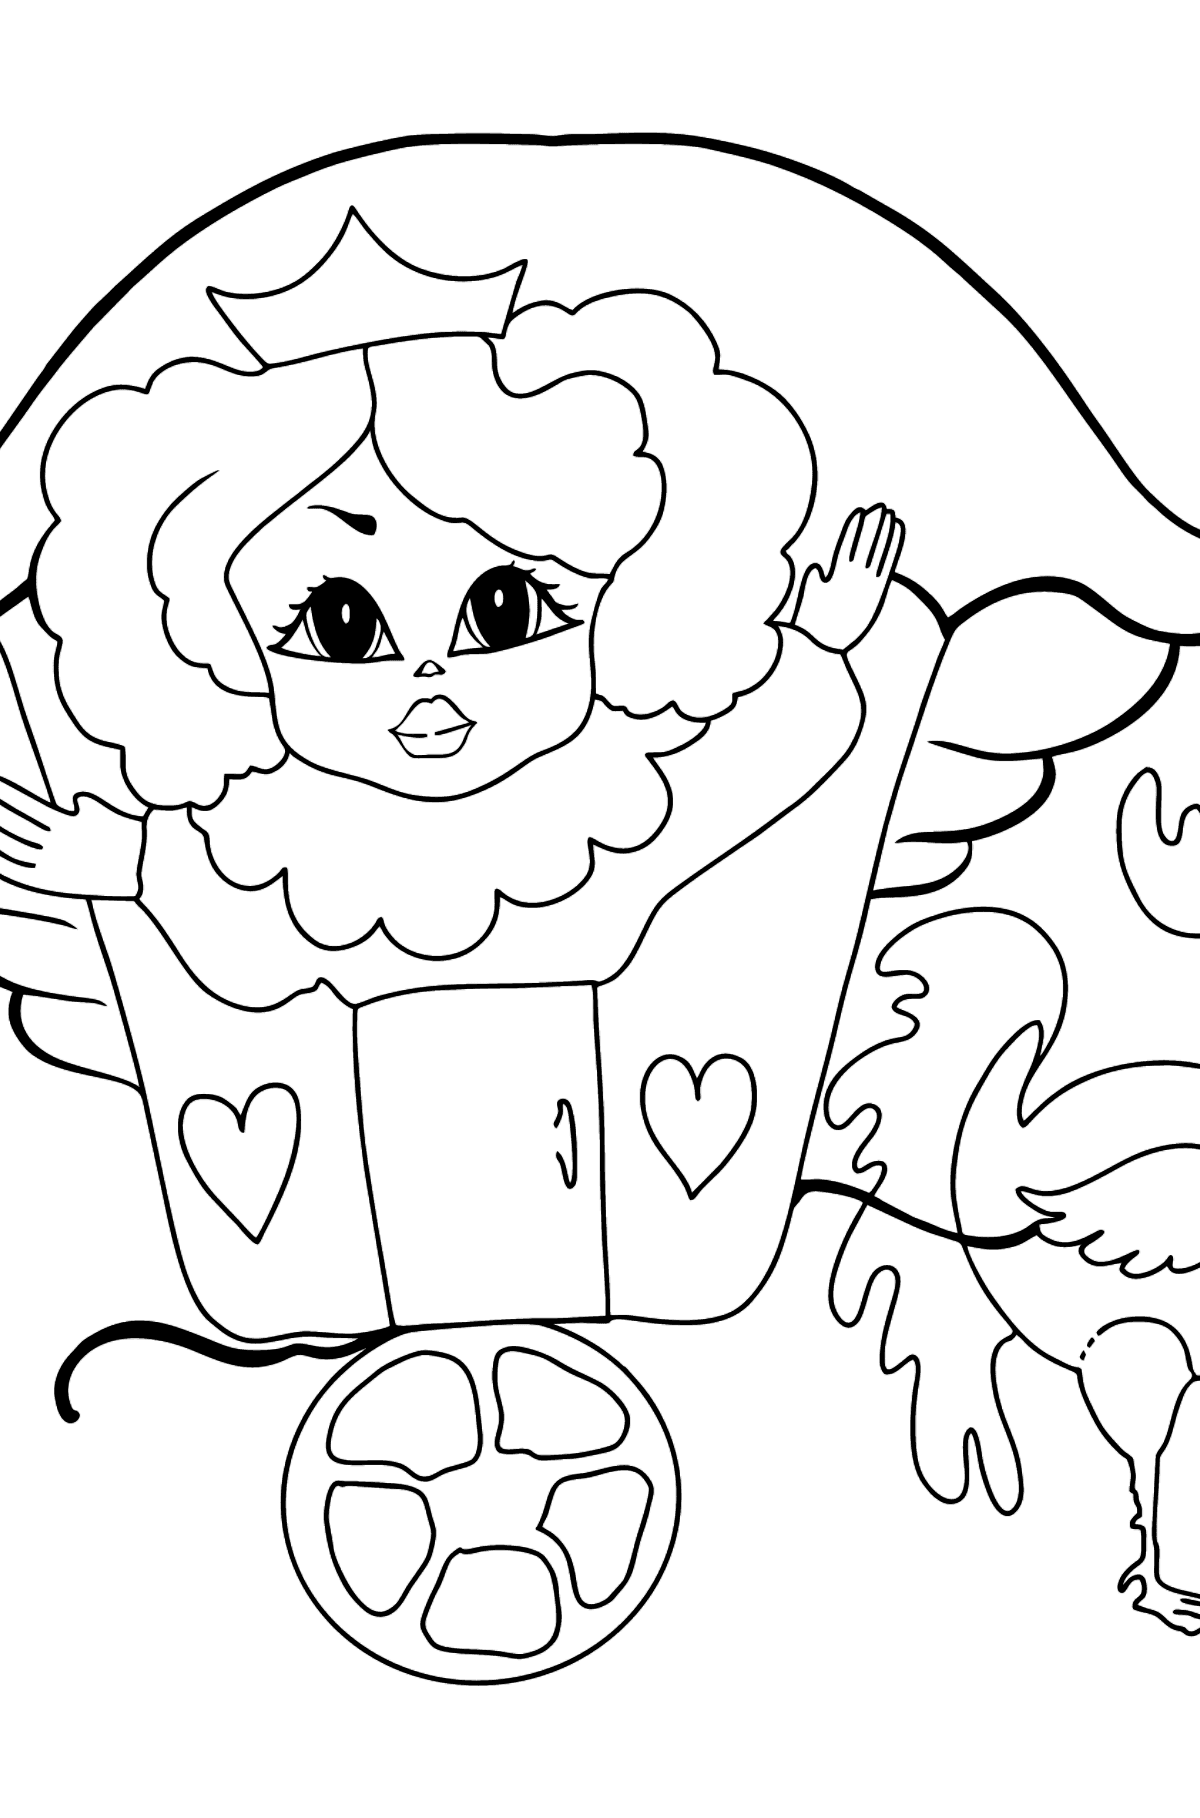 Coloring Page - A Princess in a Carriage - Coloring Pages for Kids